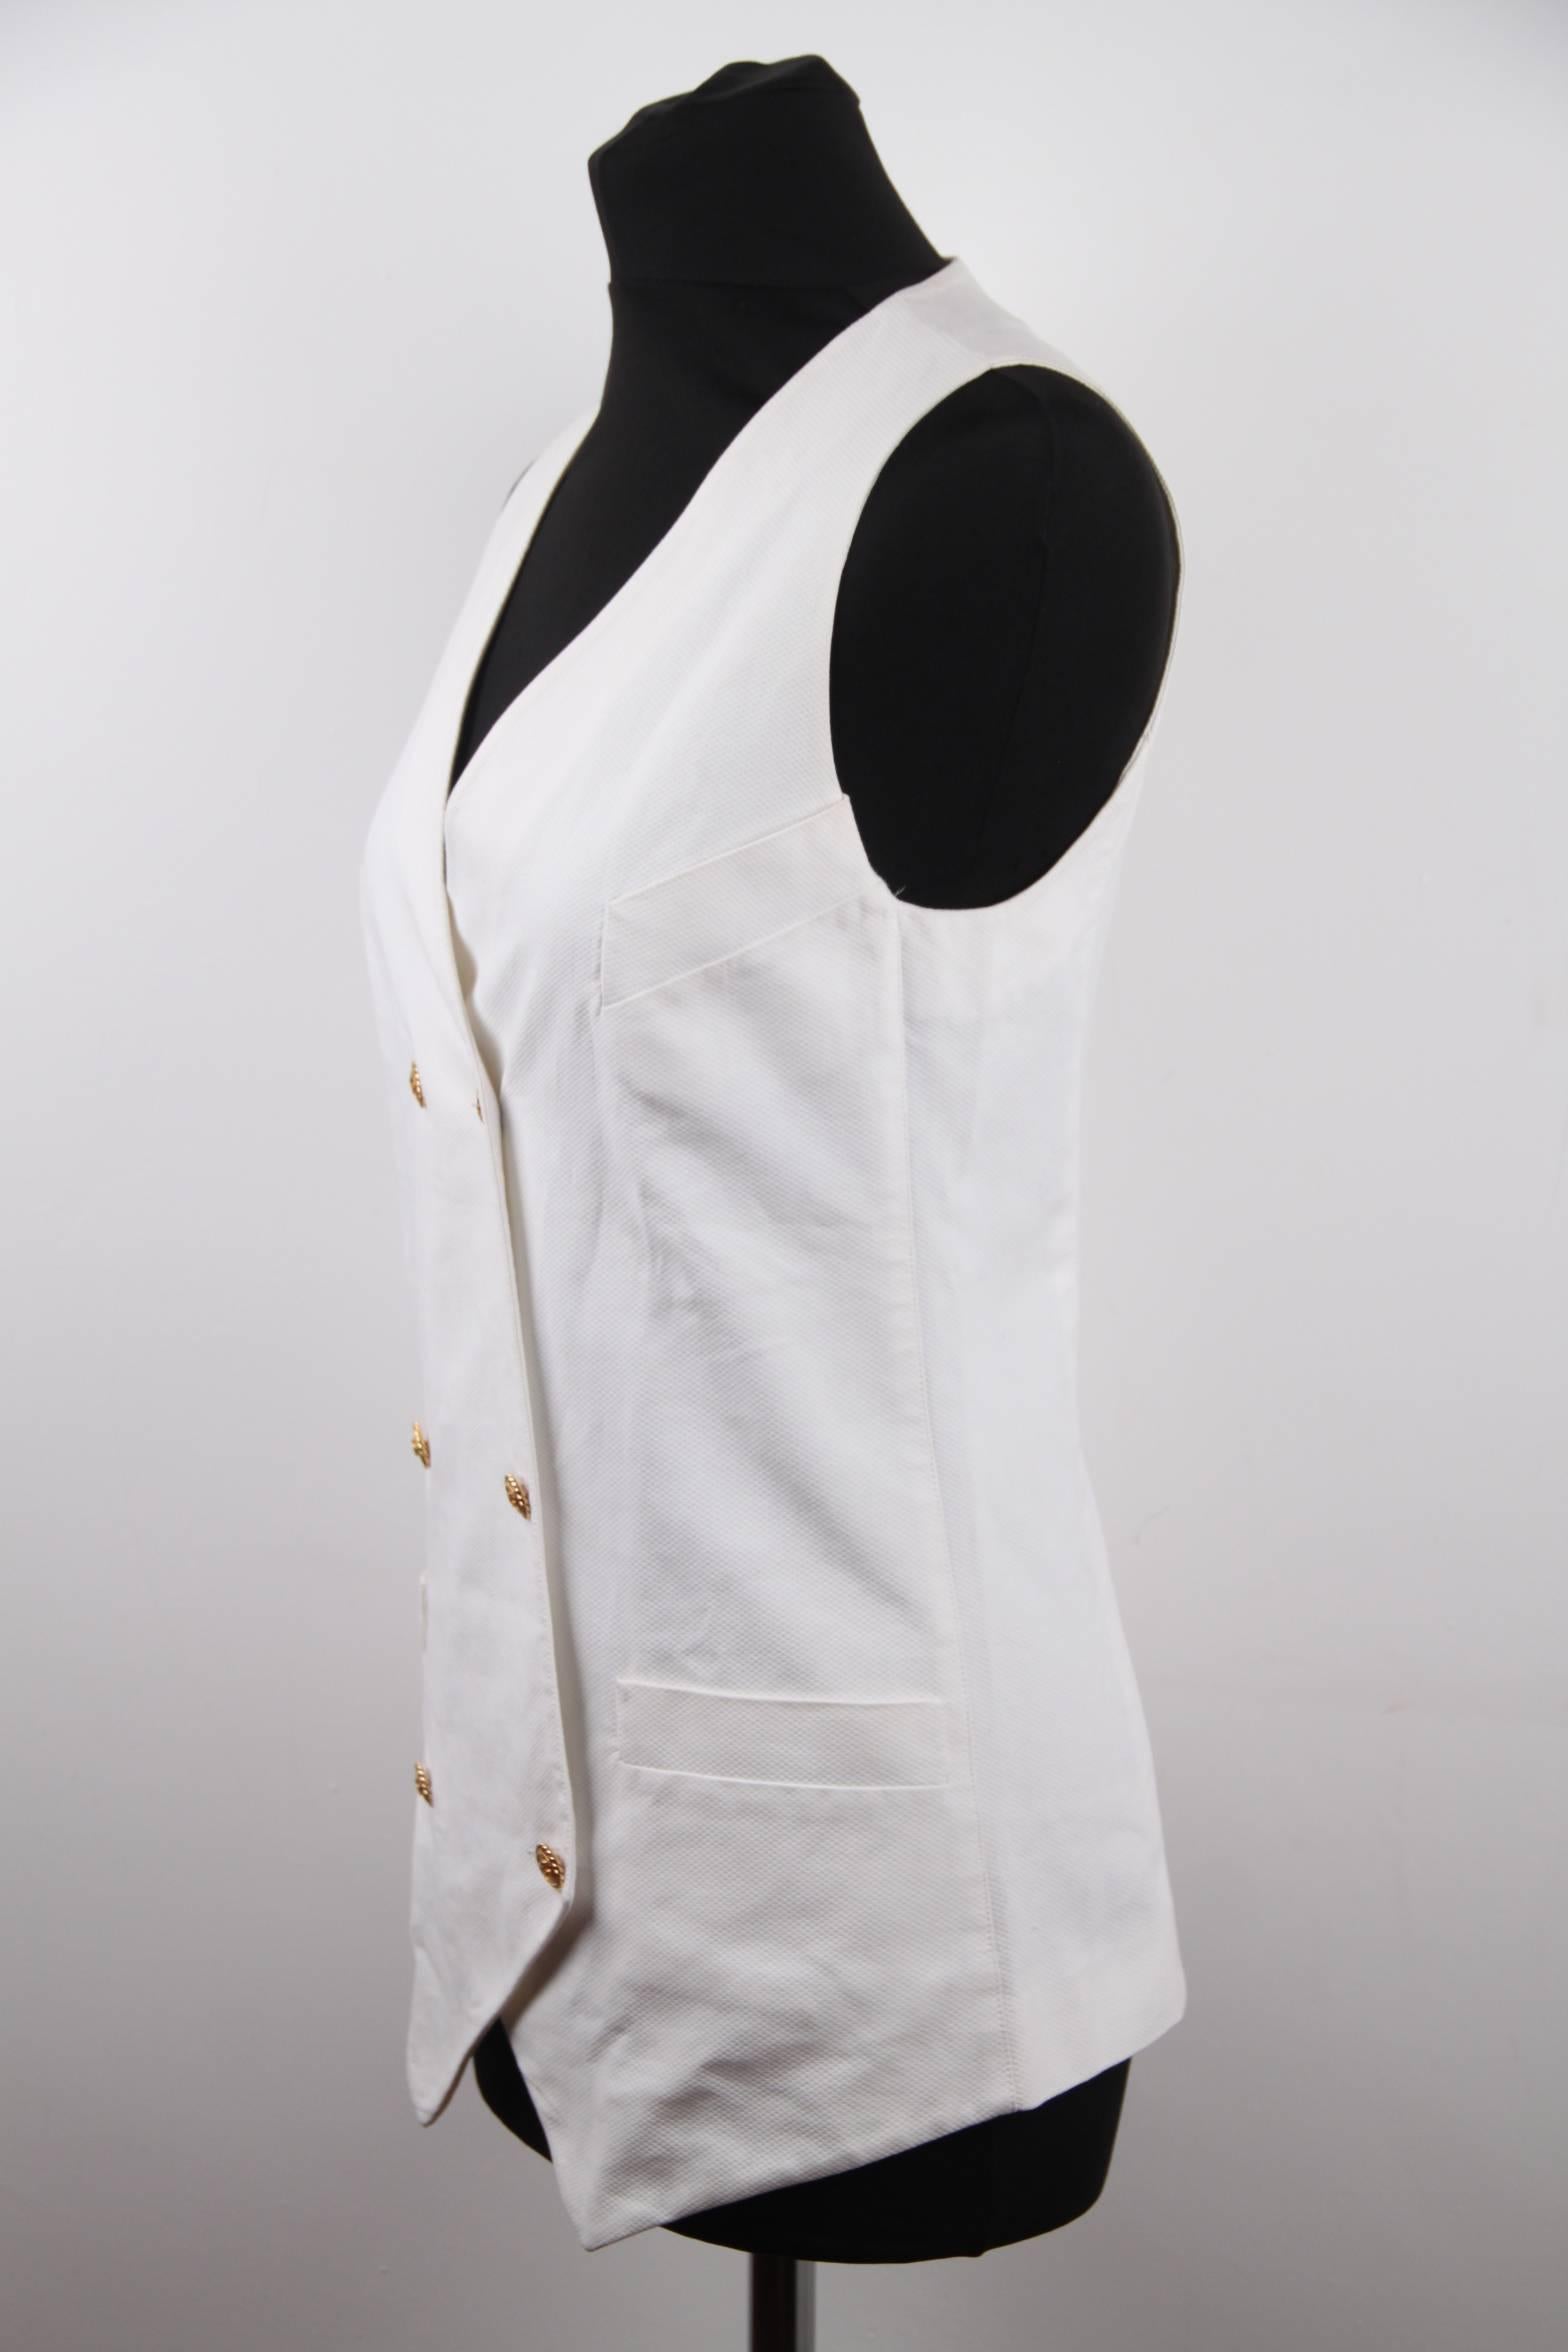 Chanel Vintage White Double Breasted Vest Waistcoat with Logo Buttons

Model: Vest
Material: Cotton
Color: White
Gender: Women
Country of Manufacture: France
Size: Medium

Approx. measurements:
- Armpit to armpit (flat): 15 1/2 inches - 39,4 cm
-